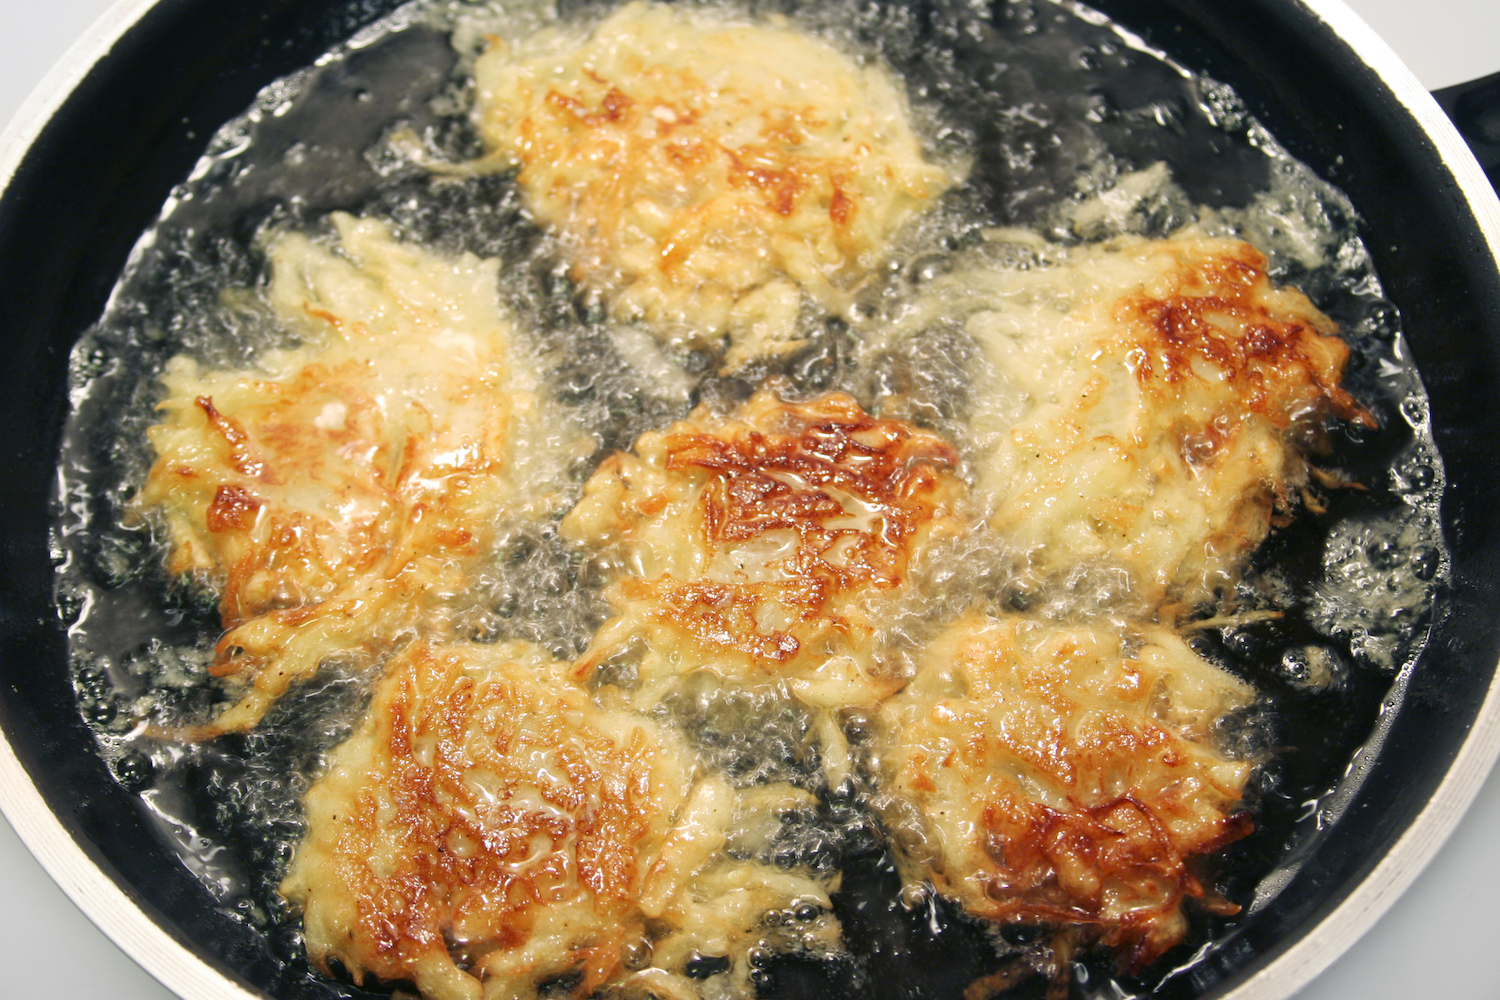 Frying Food in an iron Skillet